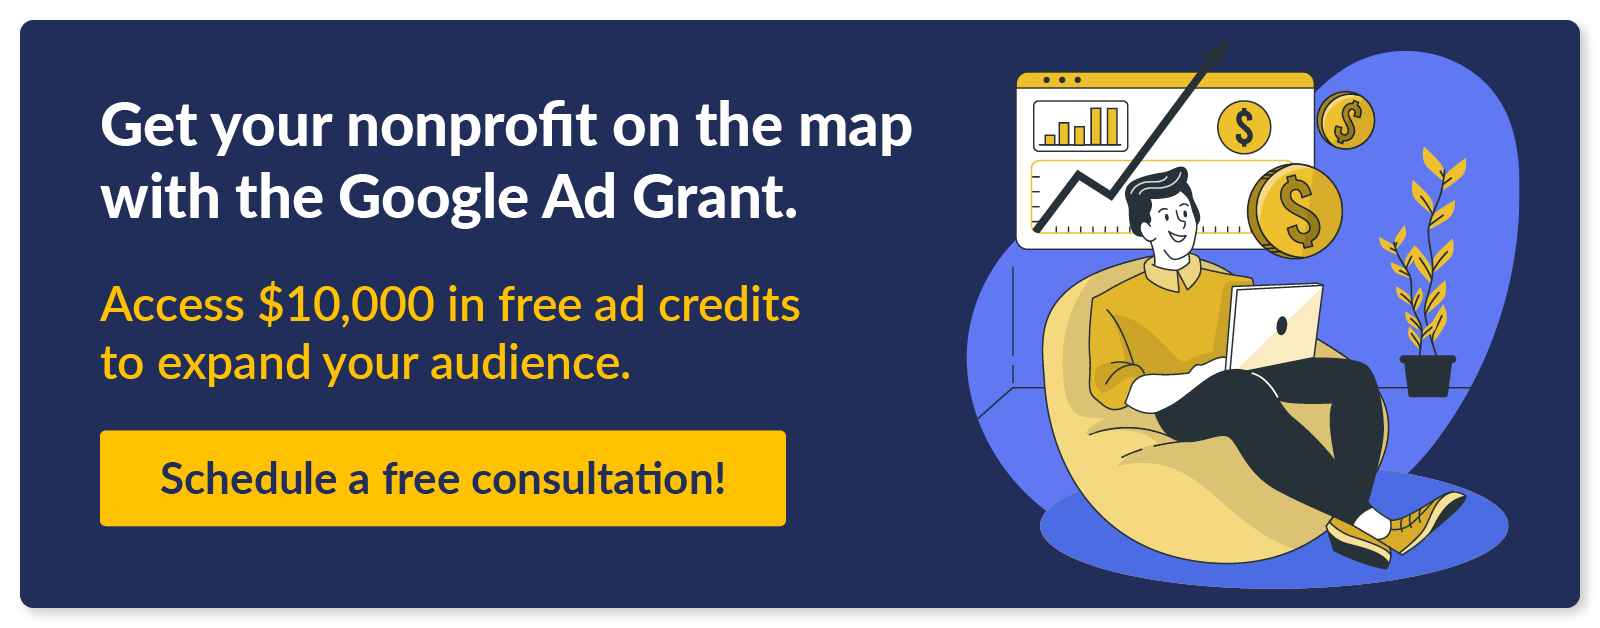 Get your nonprofit on the map with the Google Ad Grant. Access $10,000 in free ad credits to expand your audience. Schedule a free consultation.